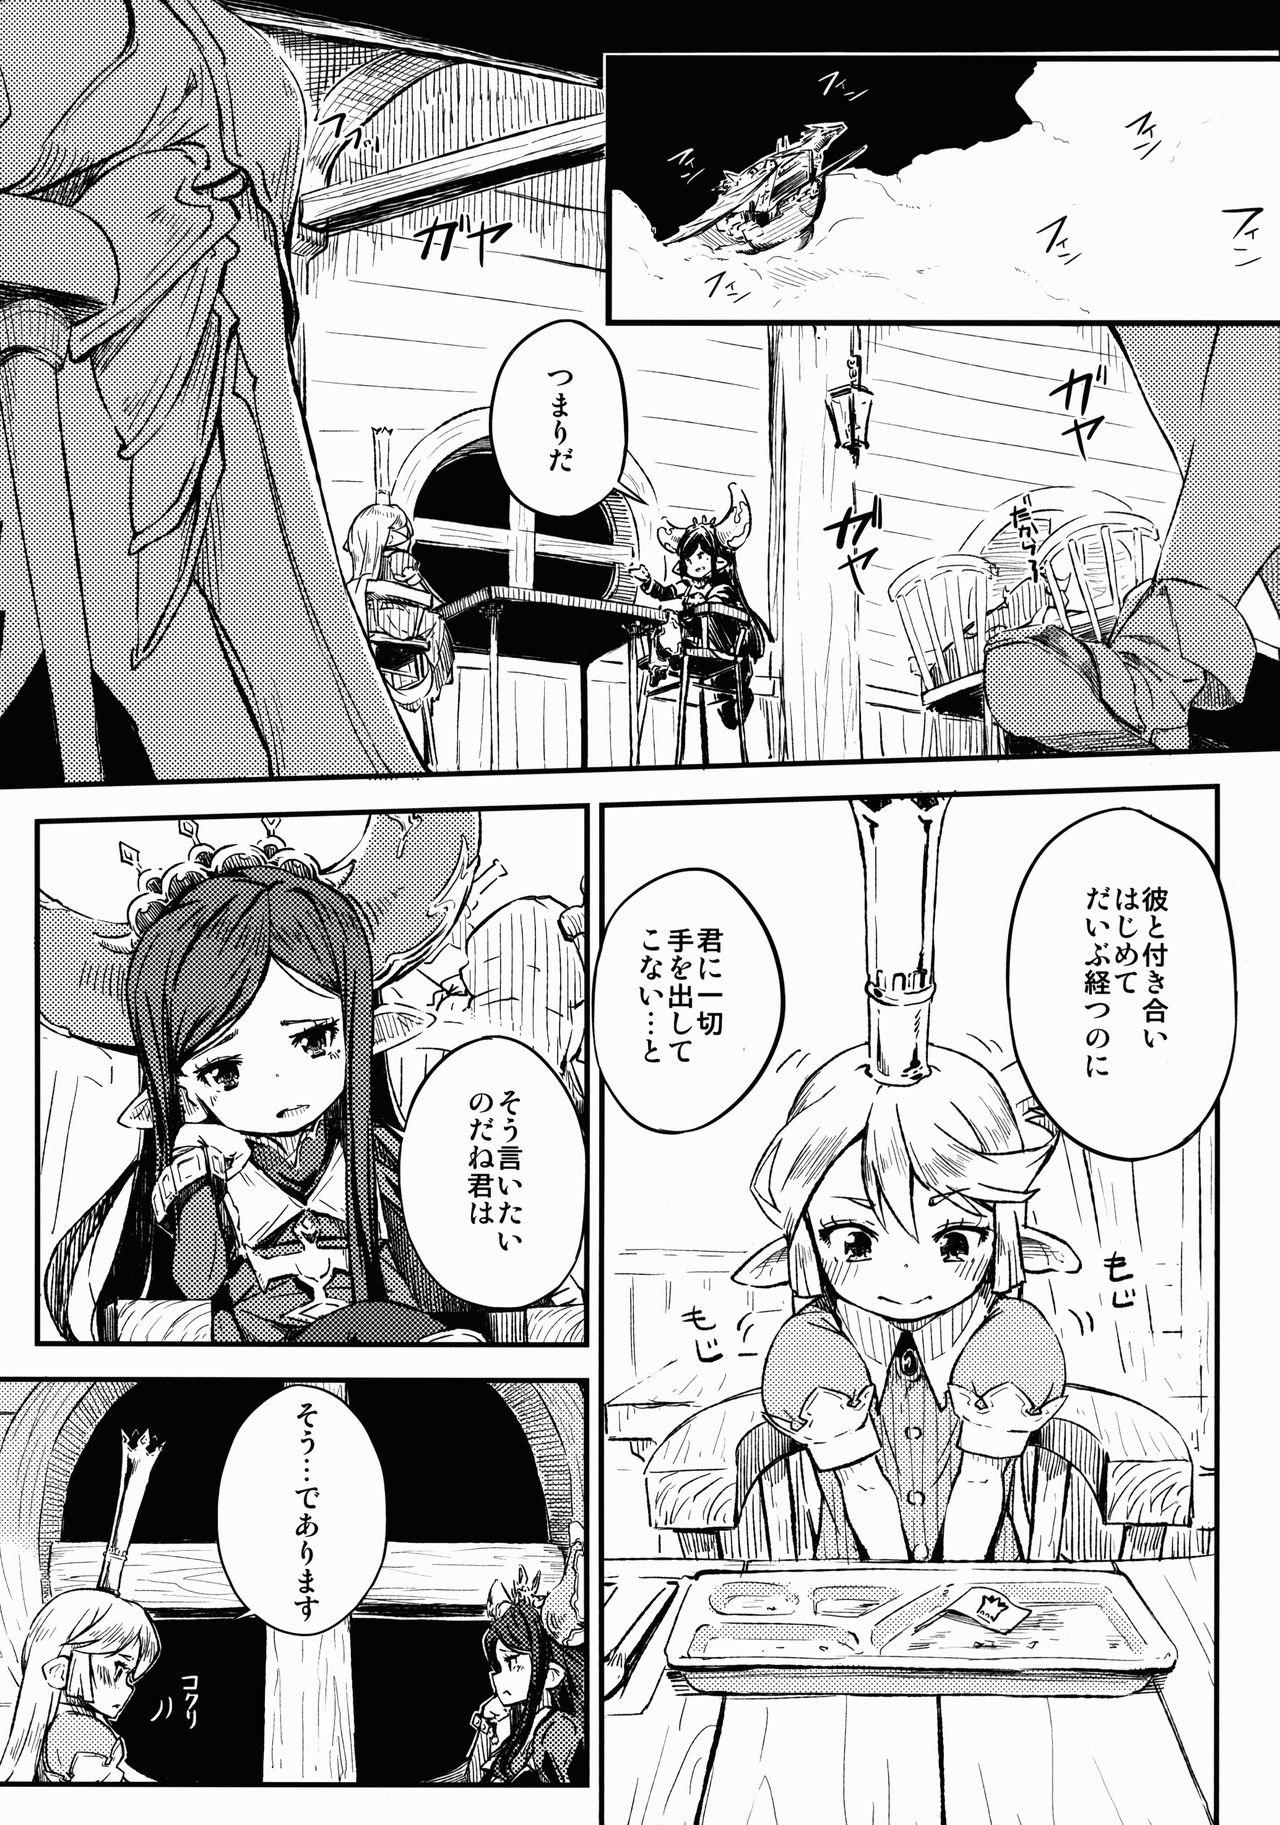 Cheating Adult Harvin - Granblue fantasy Fresh - Page 3